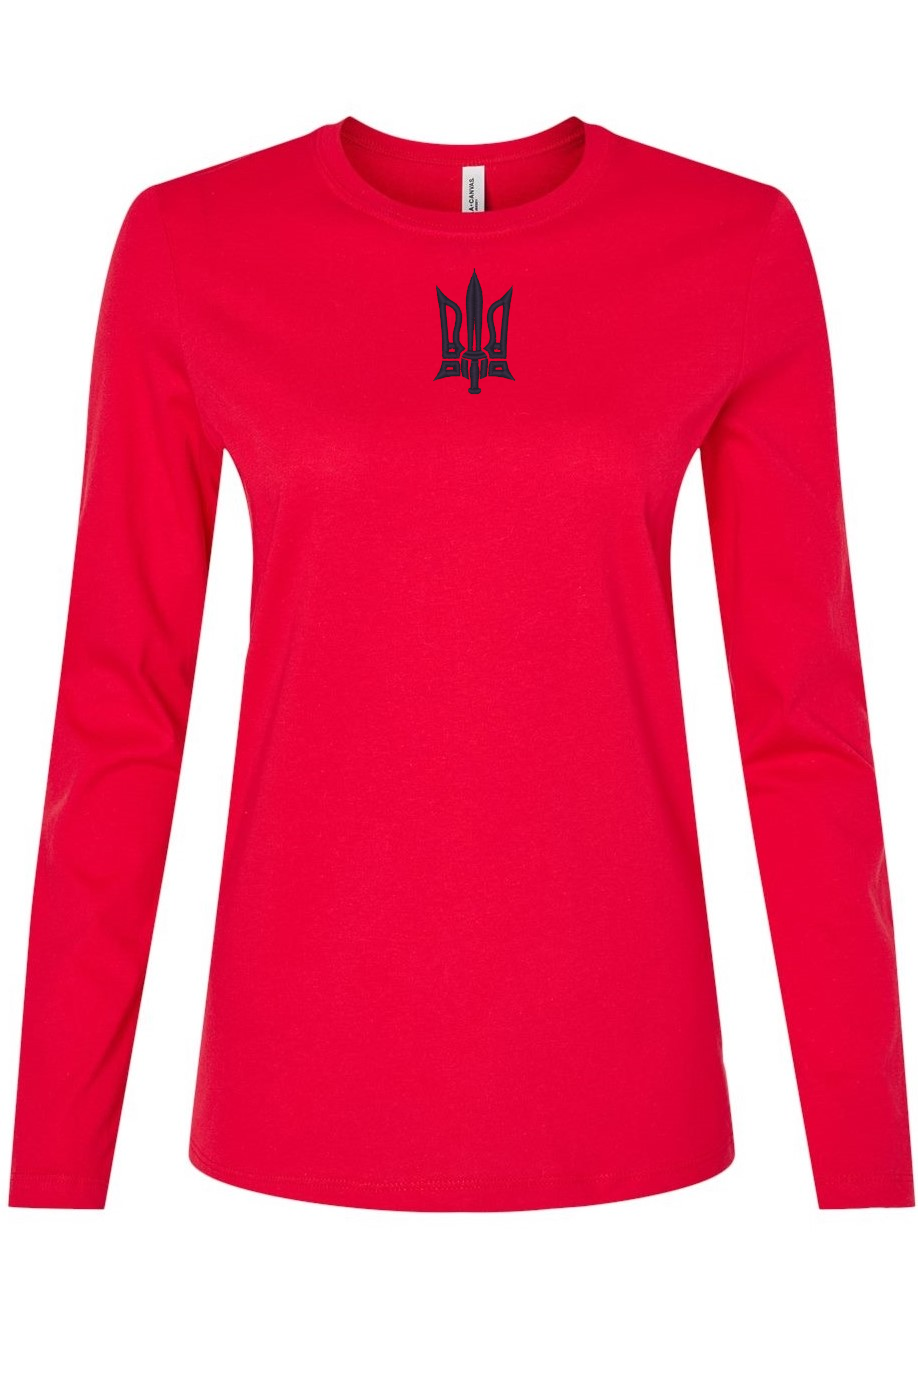 Female long sleeve embroidered top "Tryzub"